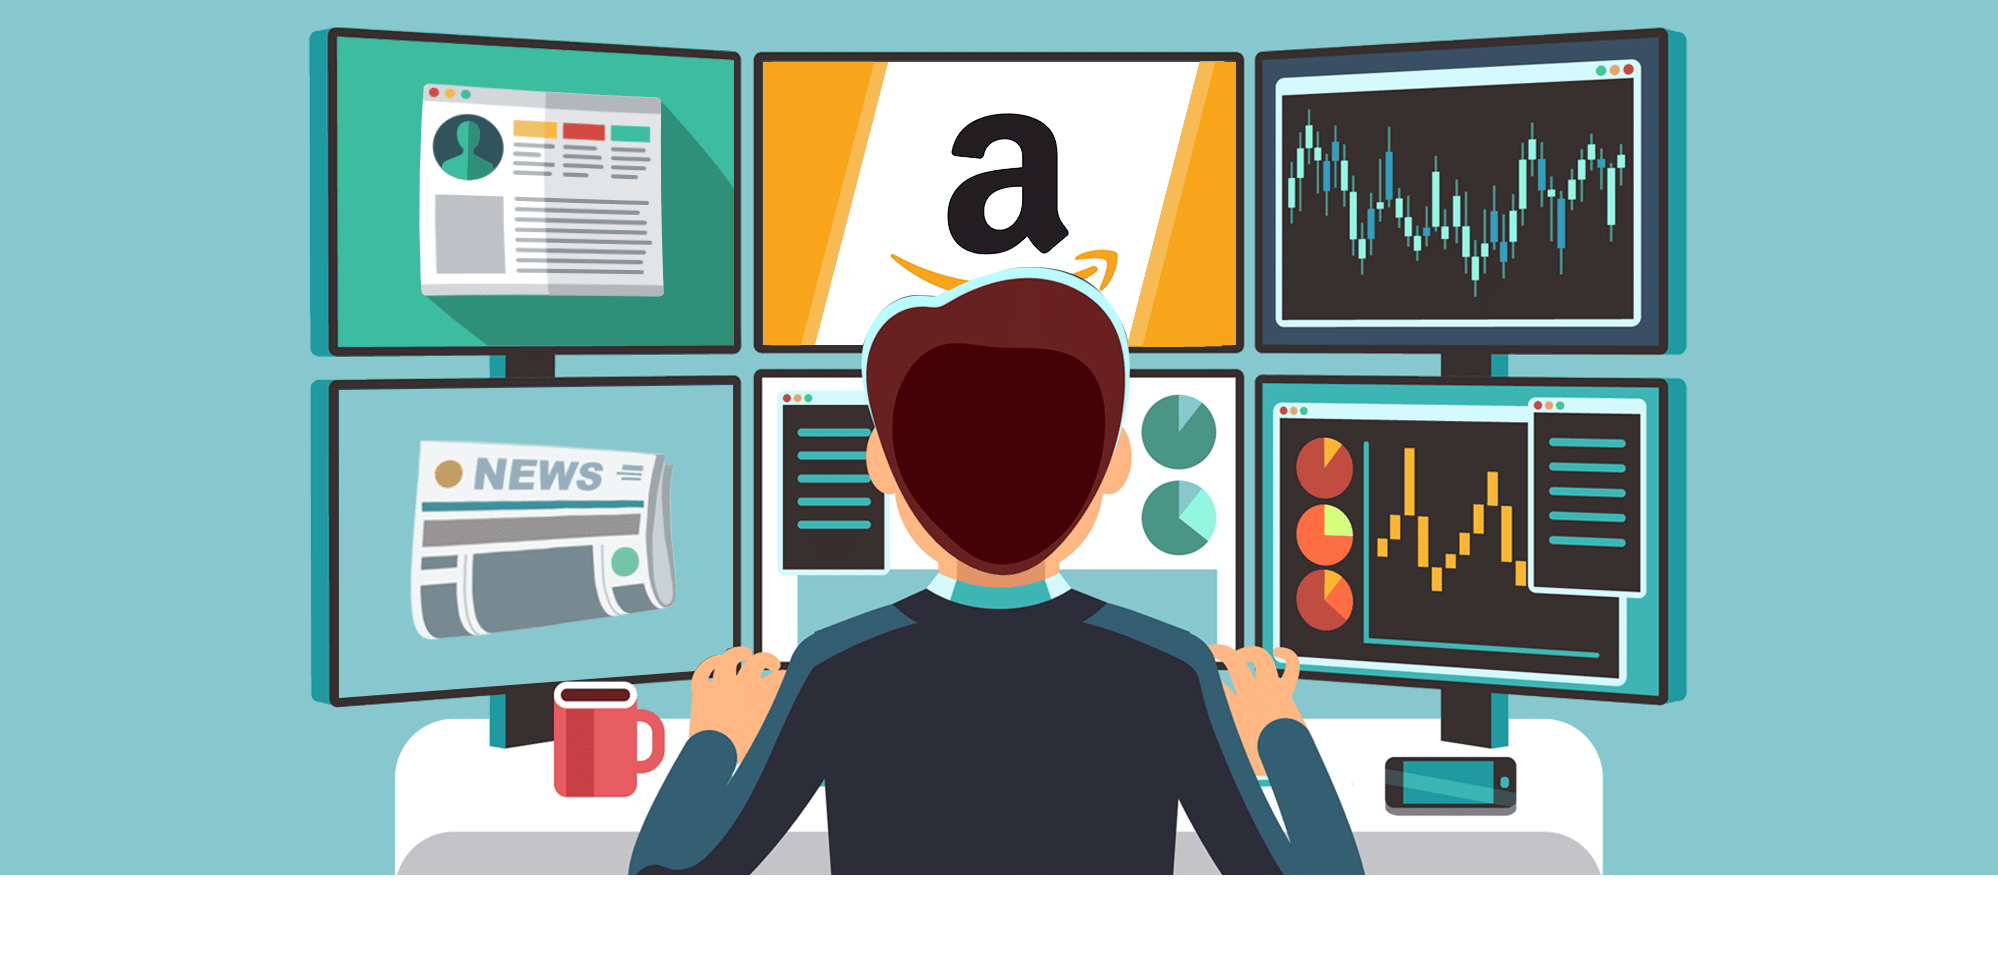 Amazon Officially Kills Rebates - What Does It Mean?